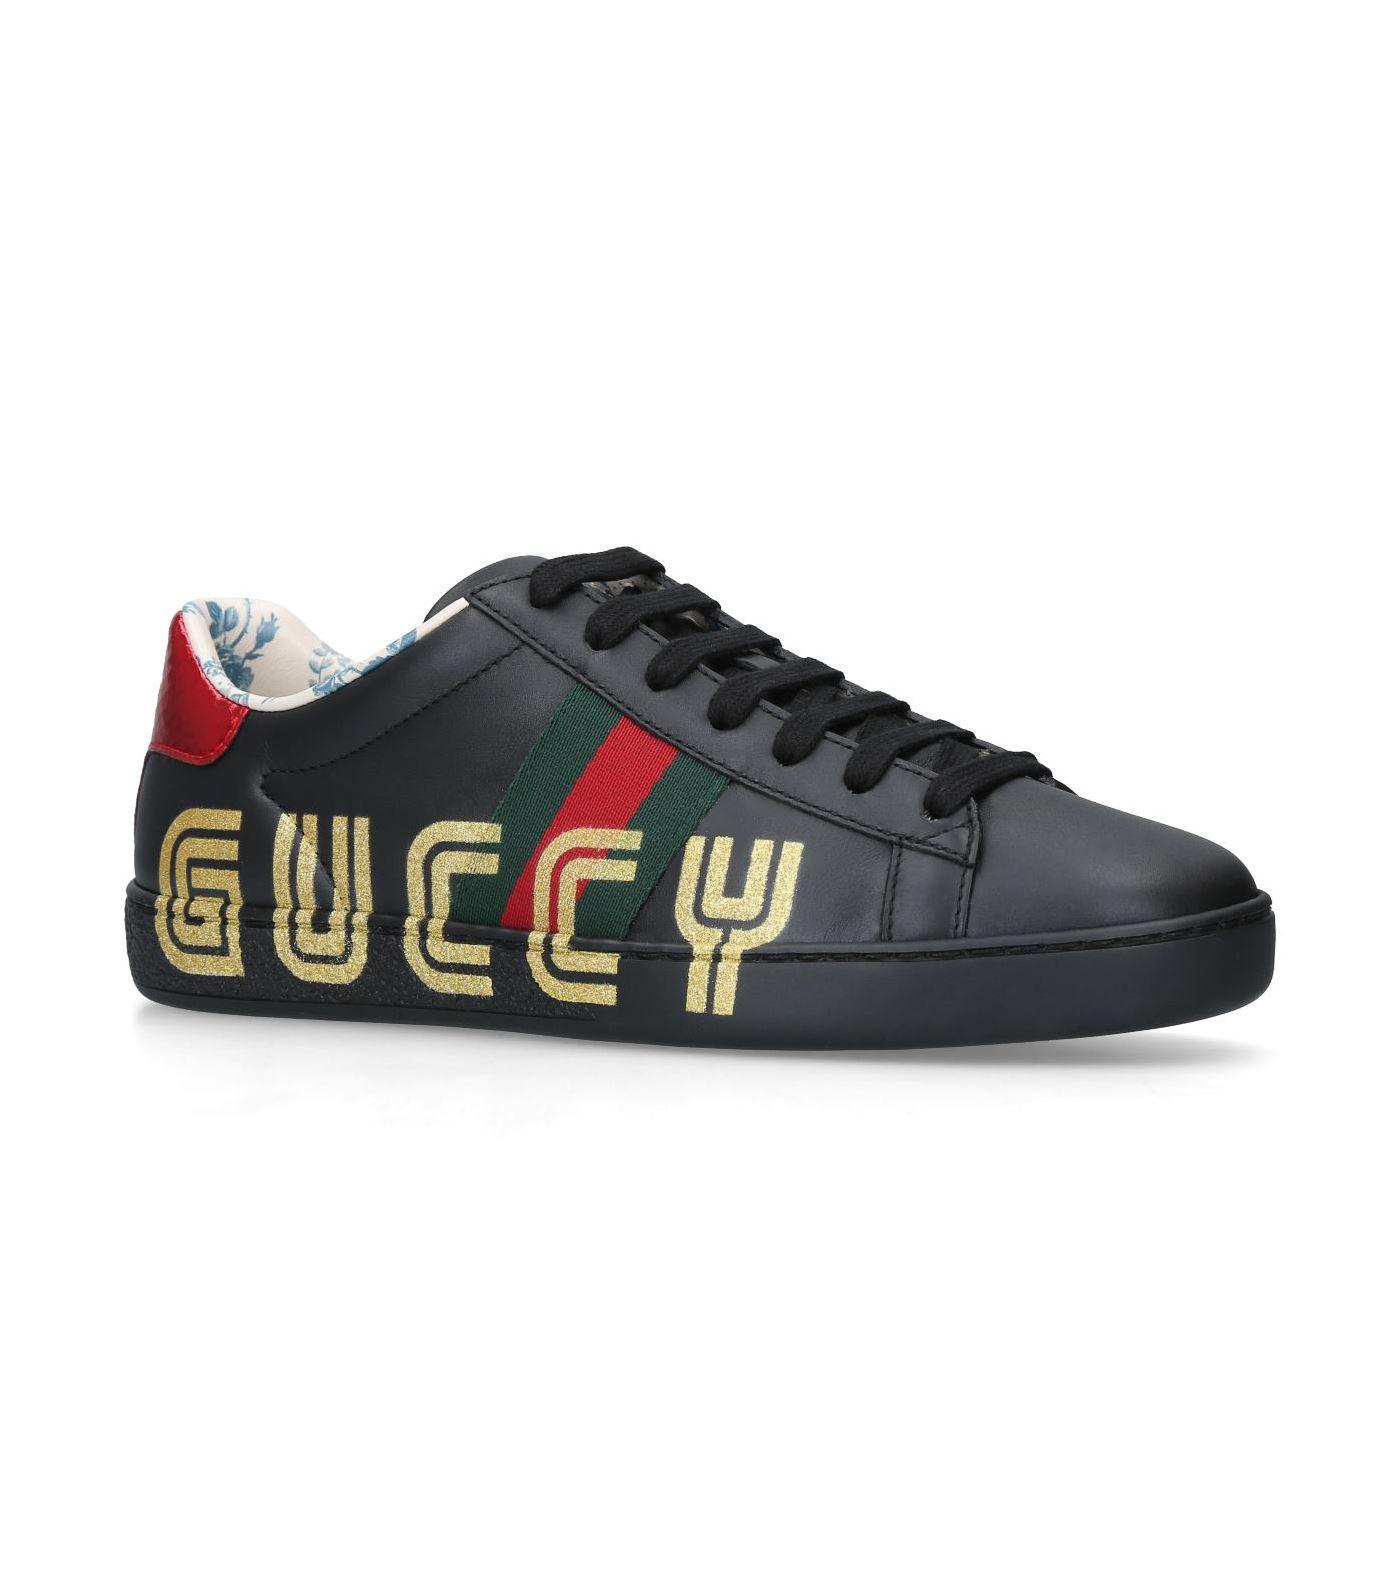 Gucci Guccy Logo Sneakers in Black | Lyst